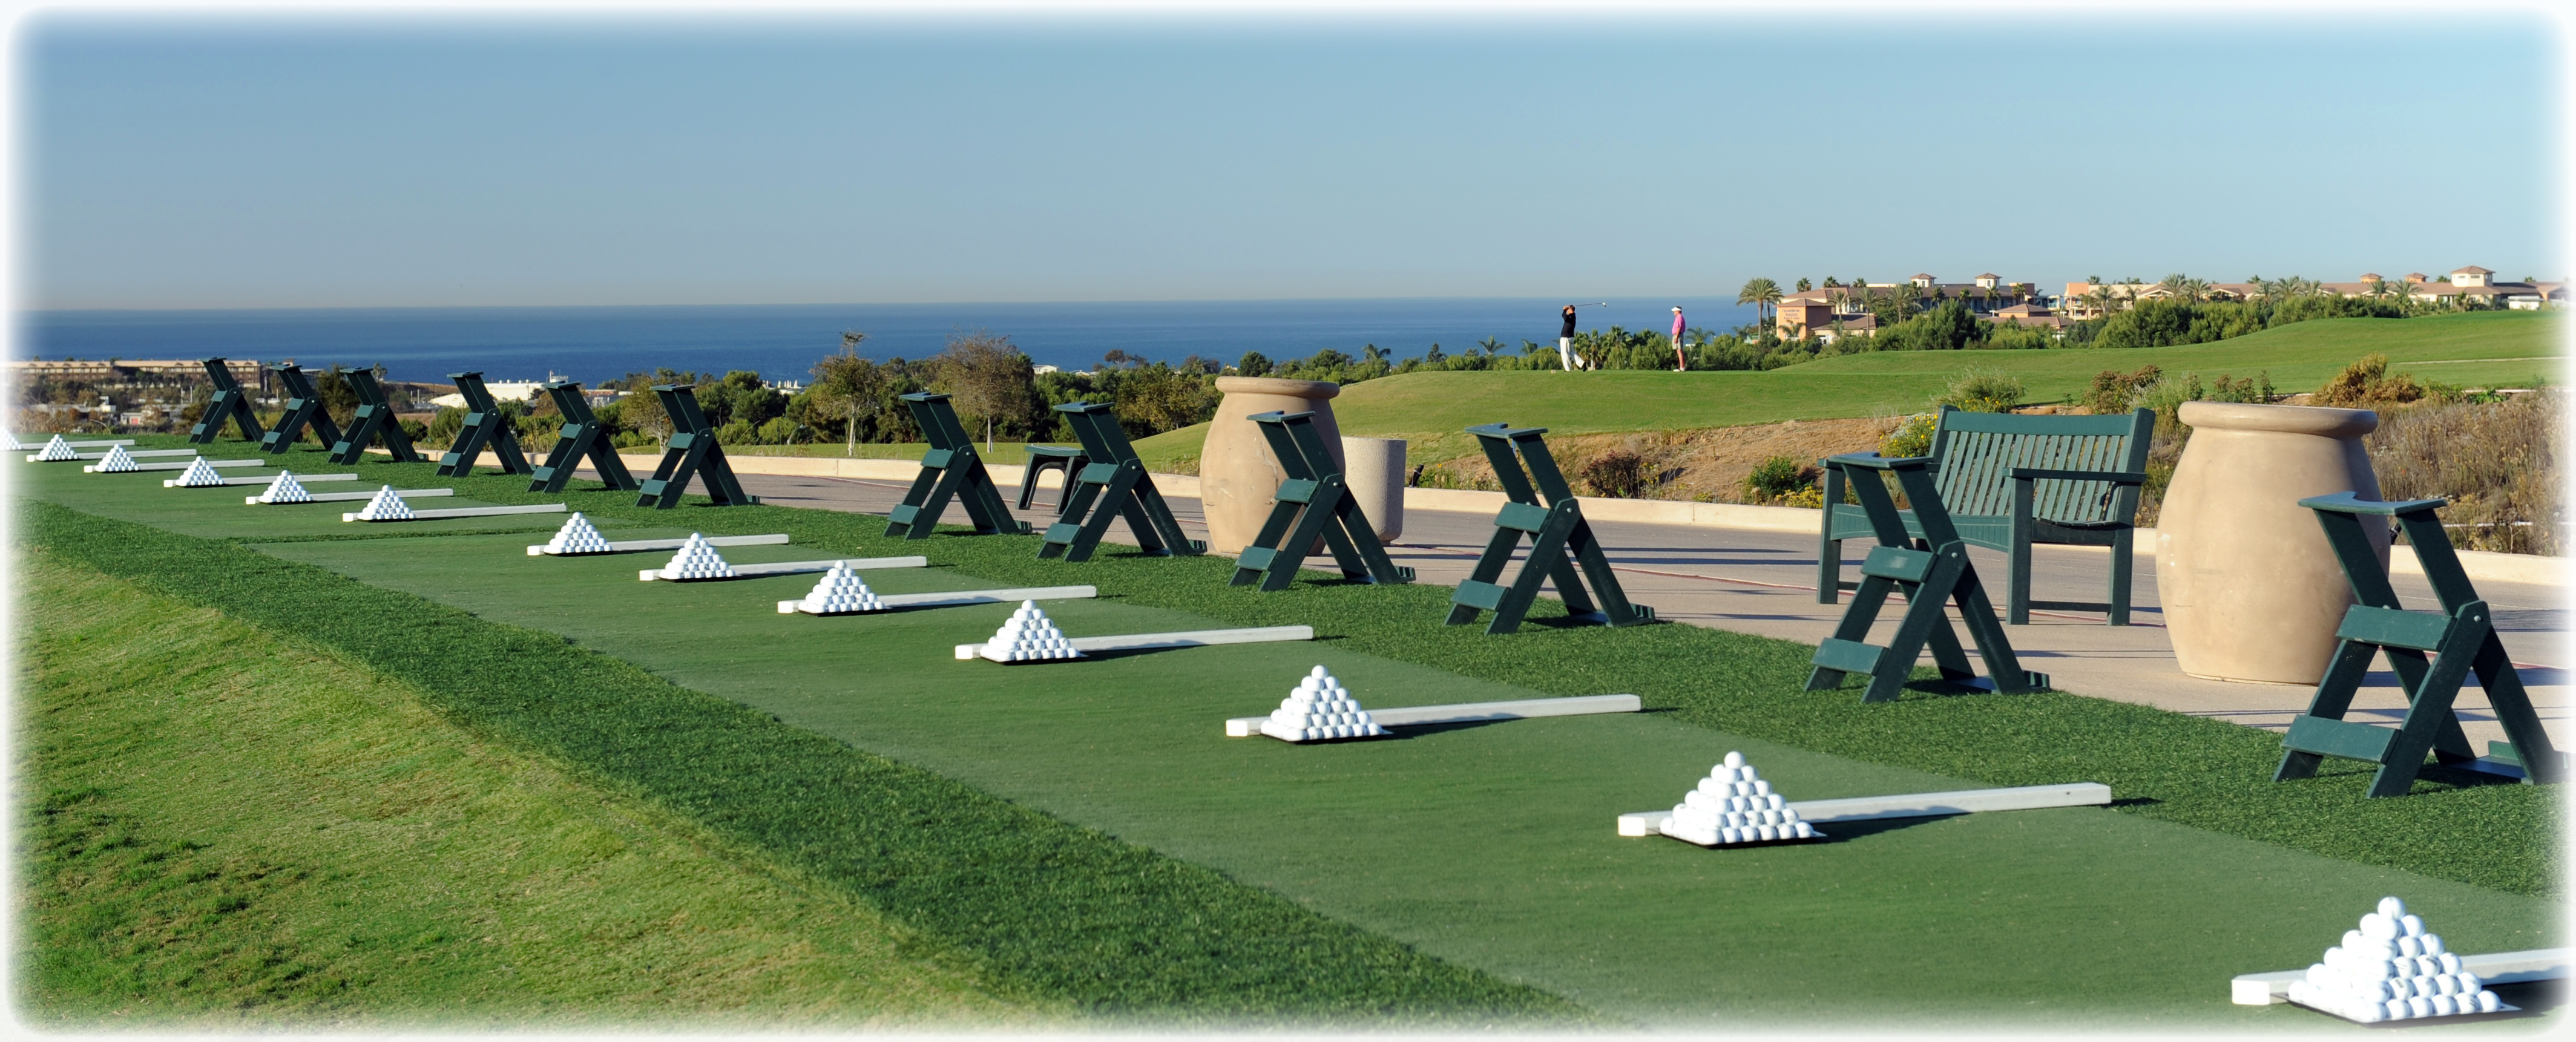 The Crossings at Carlsbad  Golf Course, Wedding Venue and Restaurant